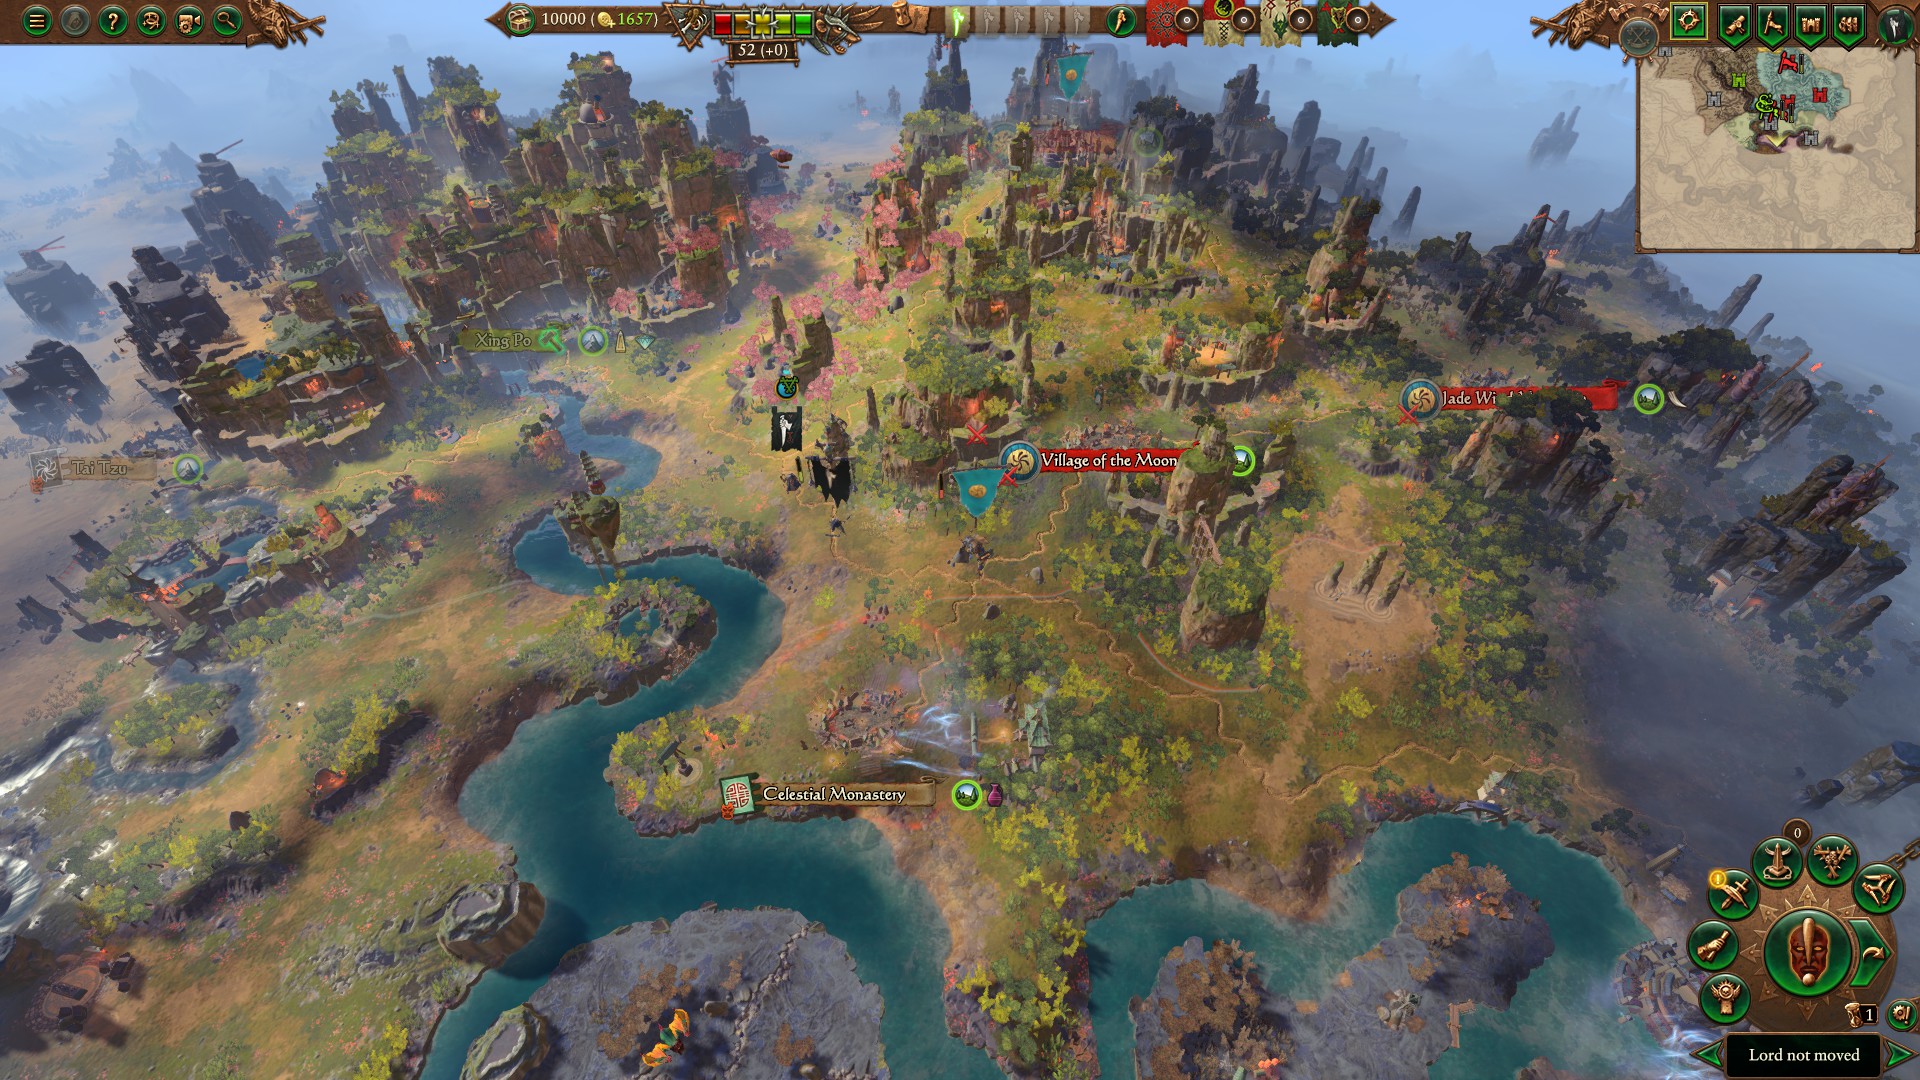 Warhammer 3 Immortal Empires Deathmaster Snikch - Skaven campaign overview, guide and second thoughts image 1